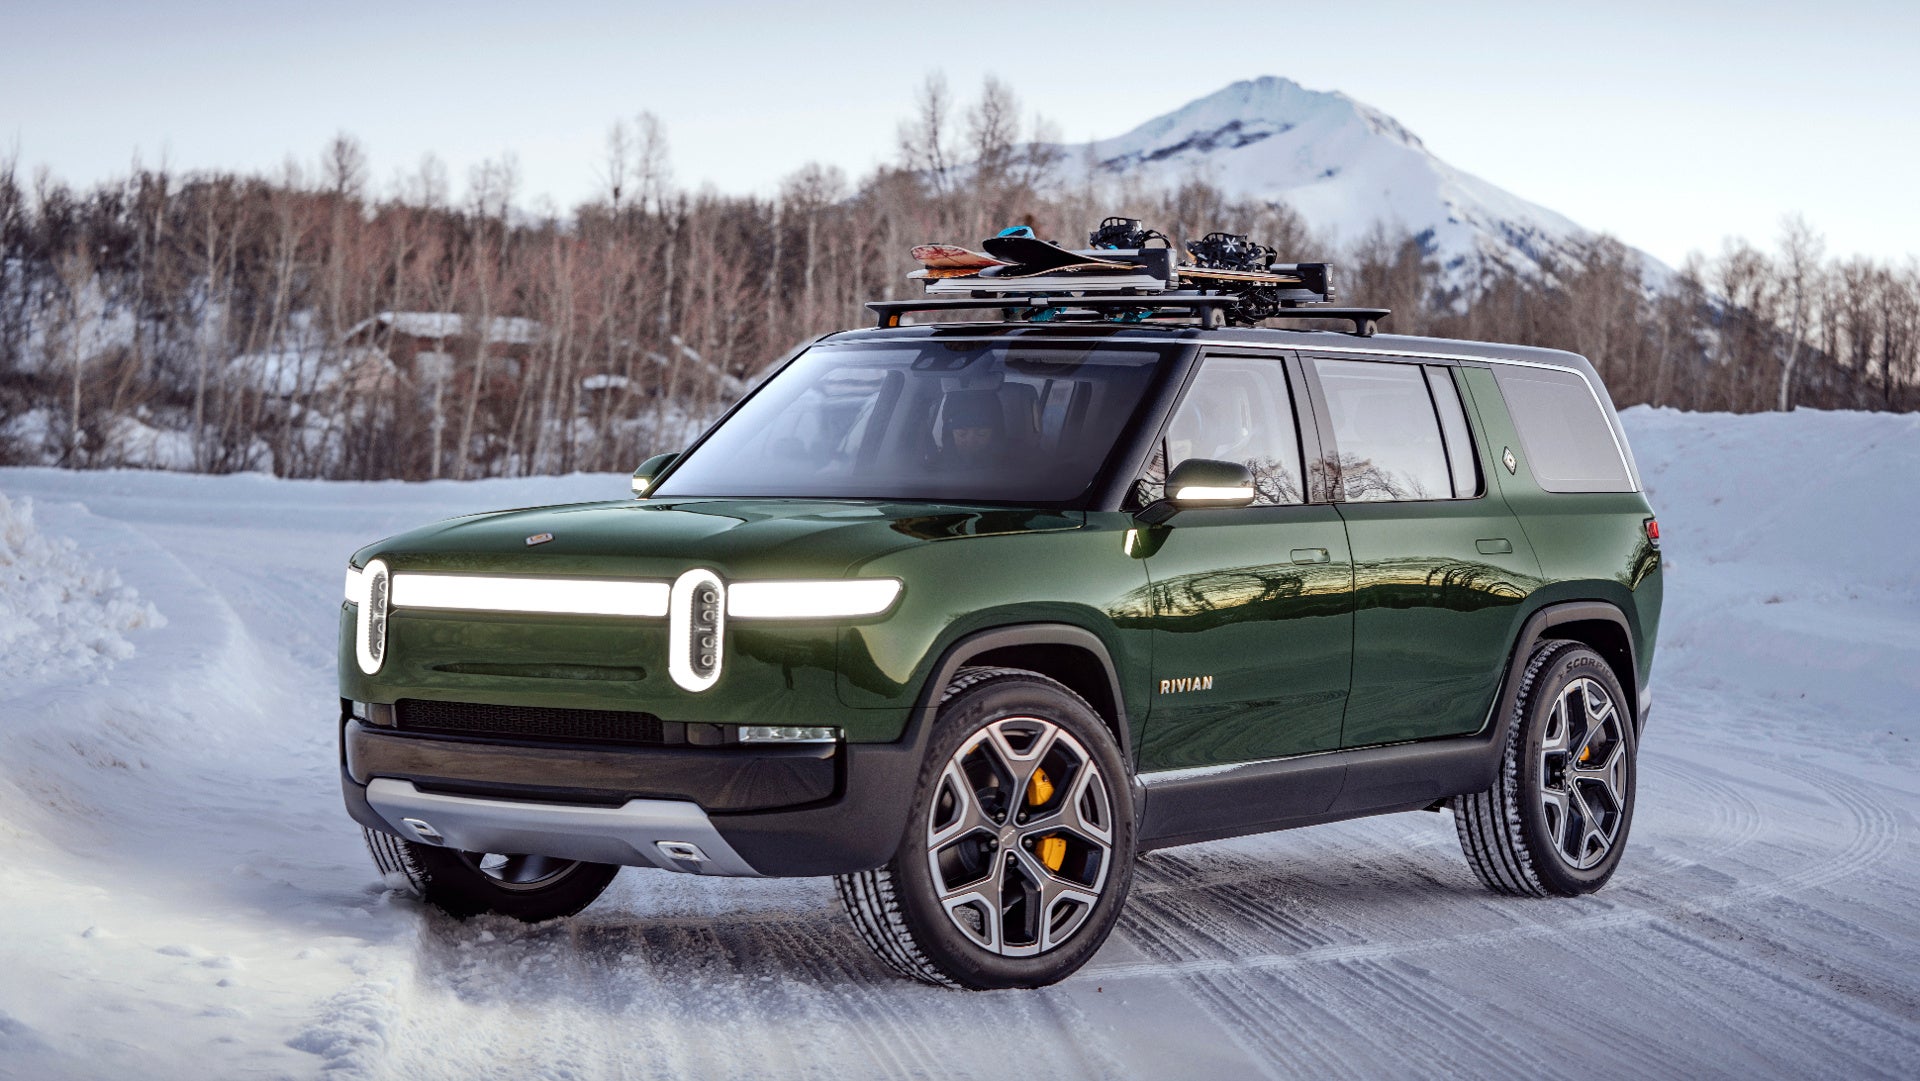 Enjoy a Seamless Service and Repair Experience with Rivian